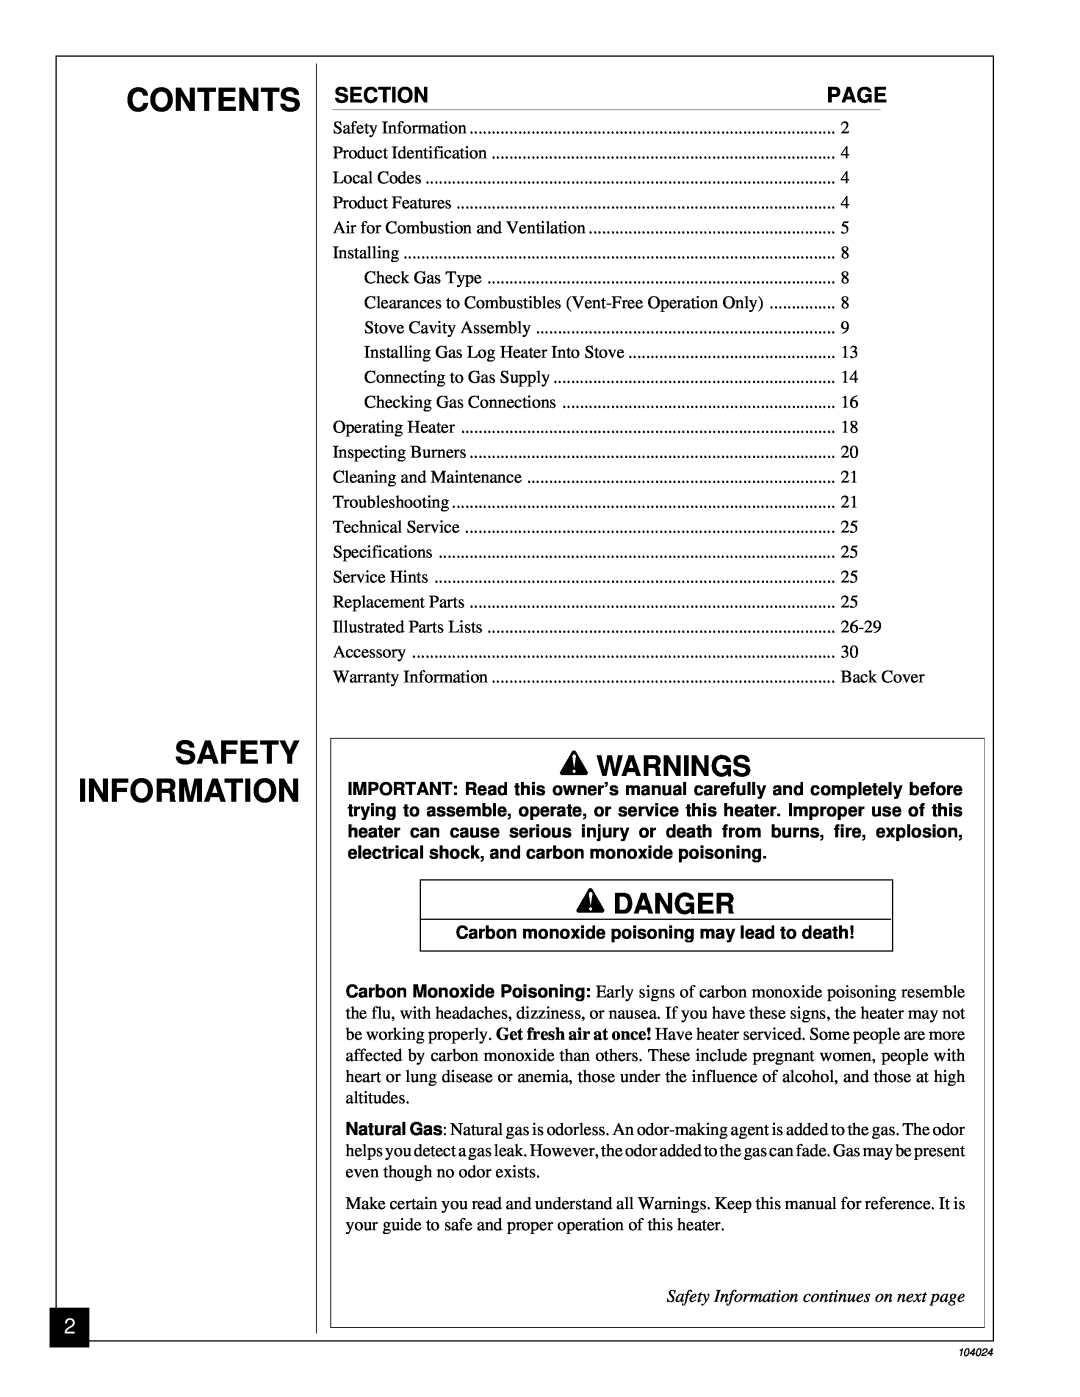 Desa SVYD18N installation manual Contents Safety Information, Warnings, Danger, Safety Information continues on next page 